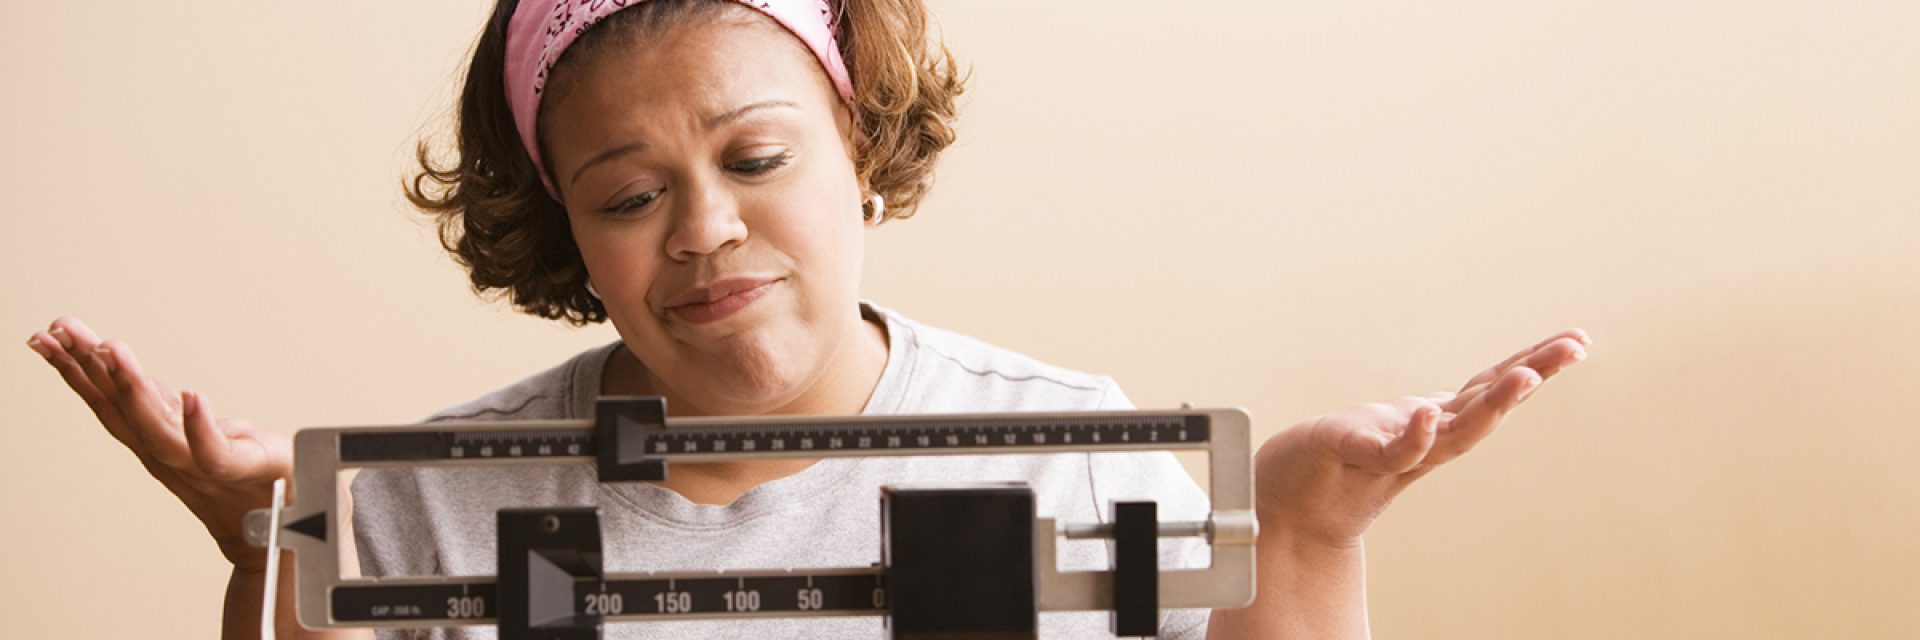 Is Poor Health Weighing You Down?